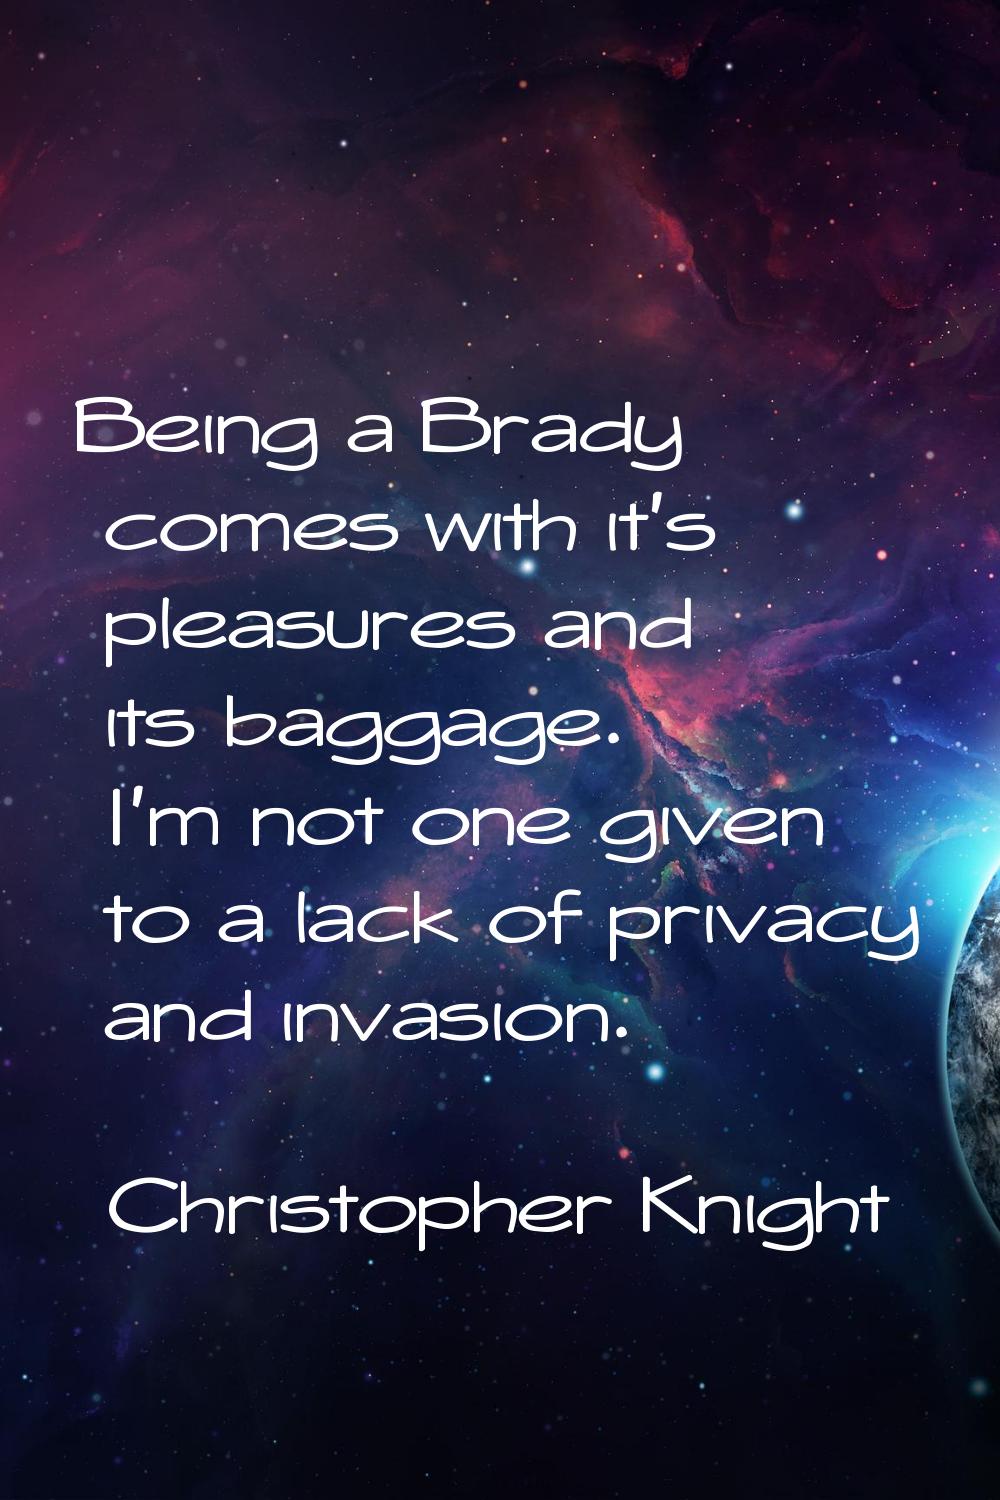 Being a Brady comes with it's pleasures and its baggage. I'm not one given to a lack of privacy and